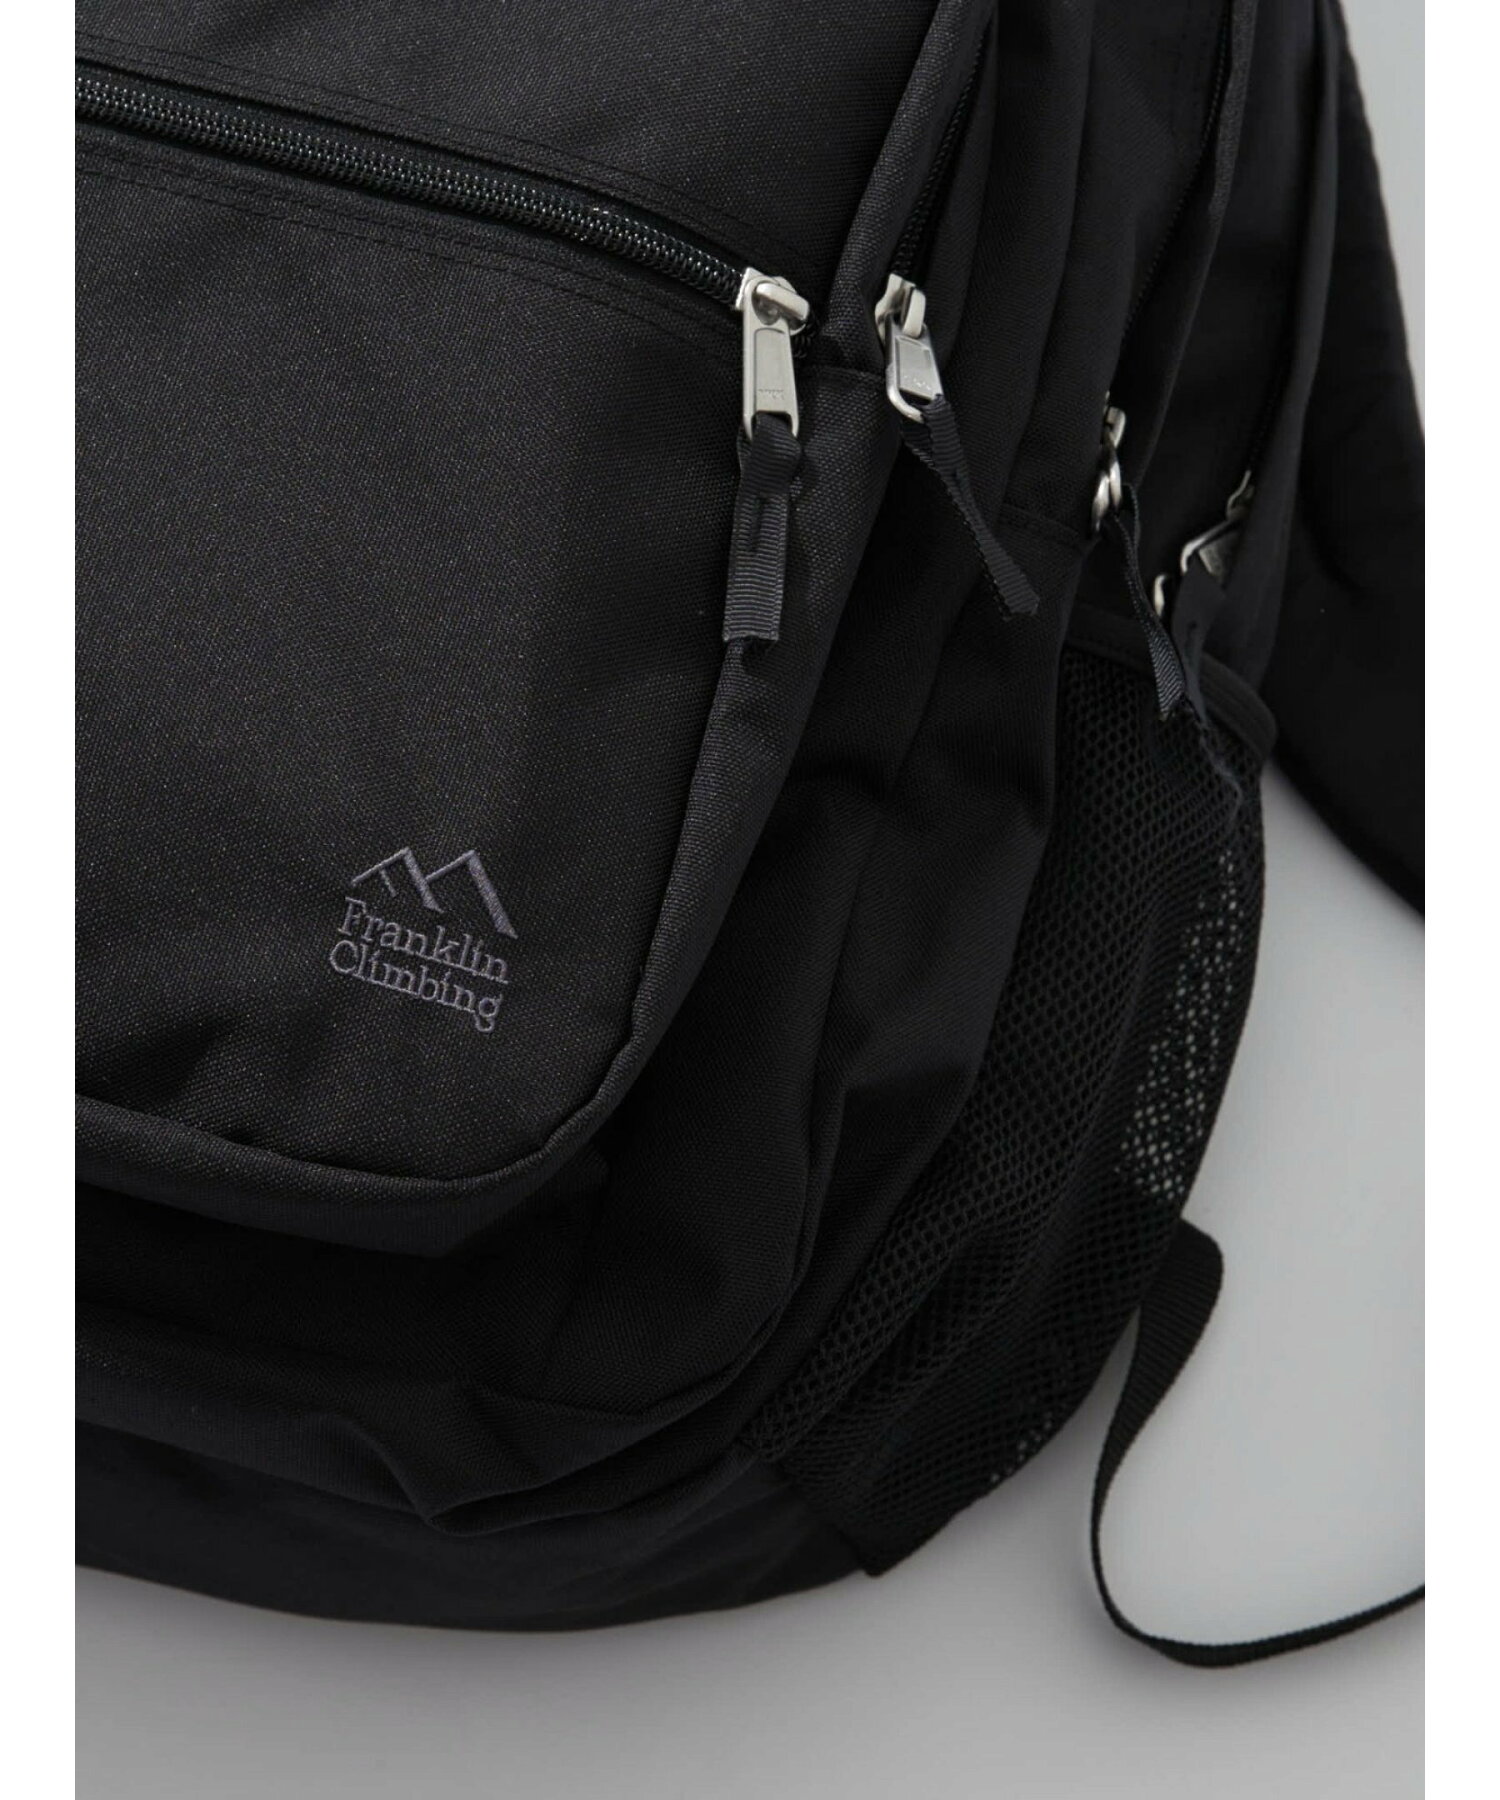 【Franklin Climbing】 BACKPACK 35Lリュック